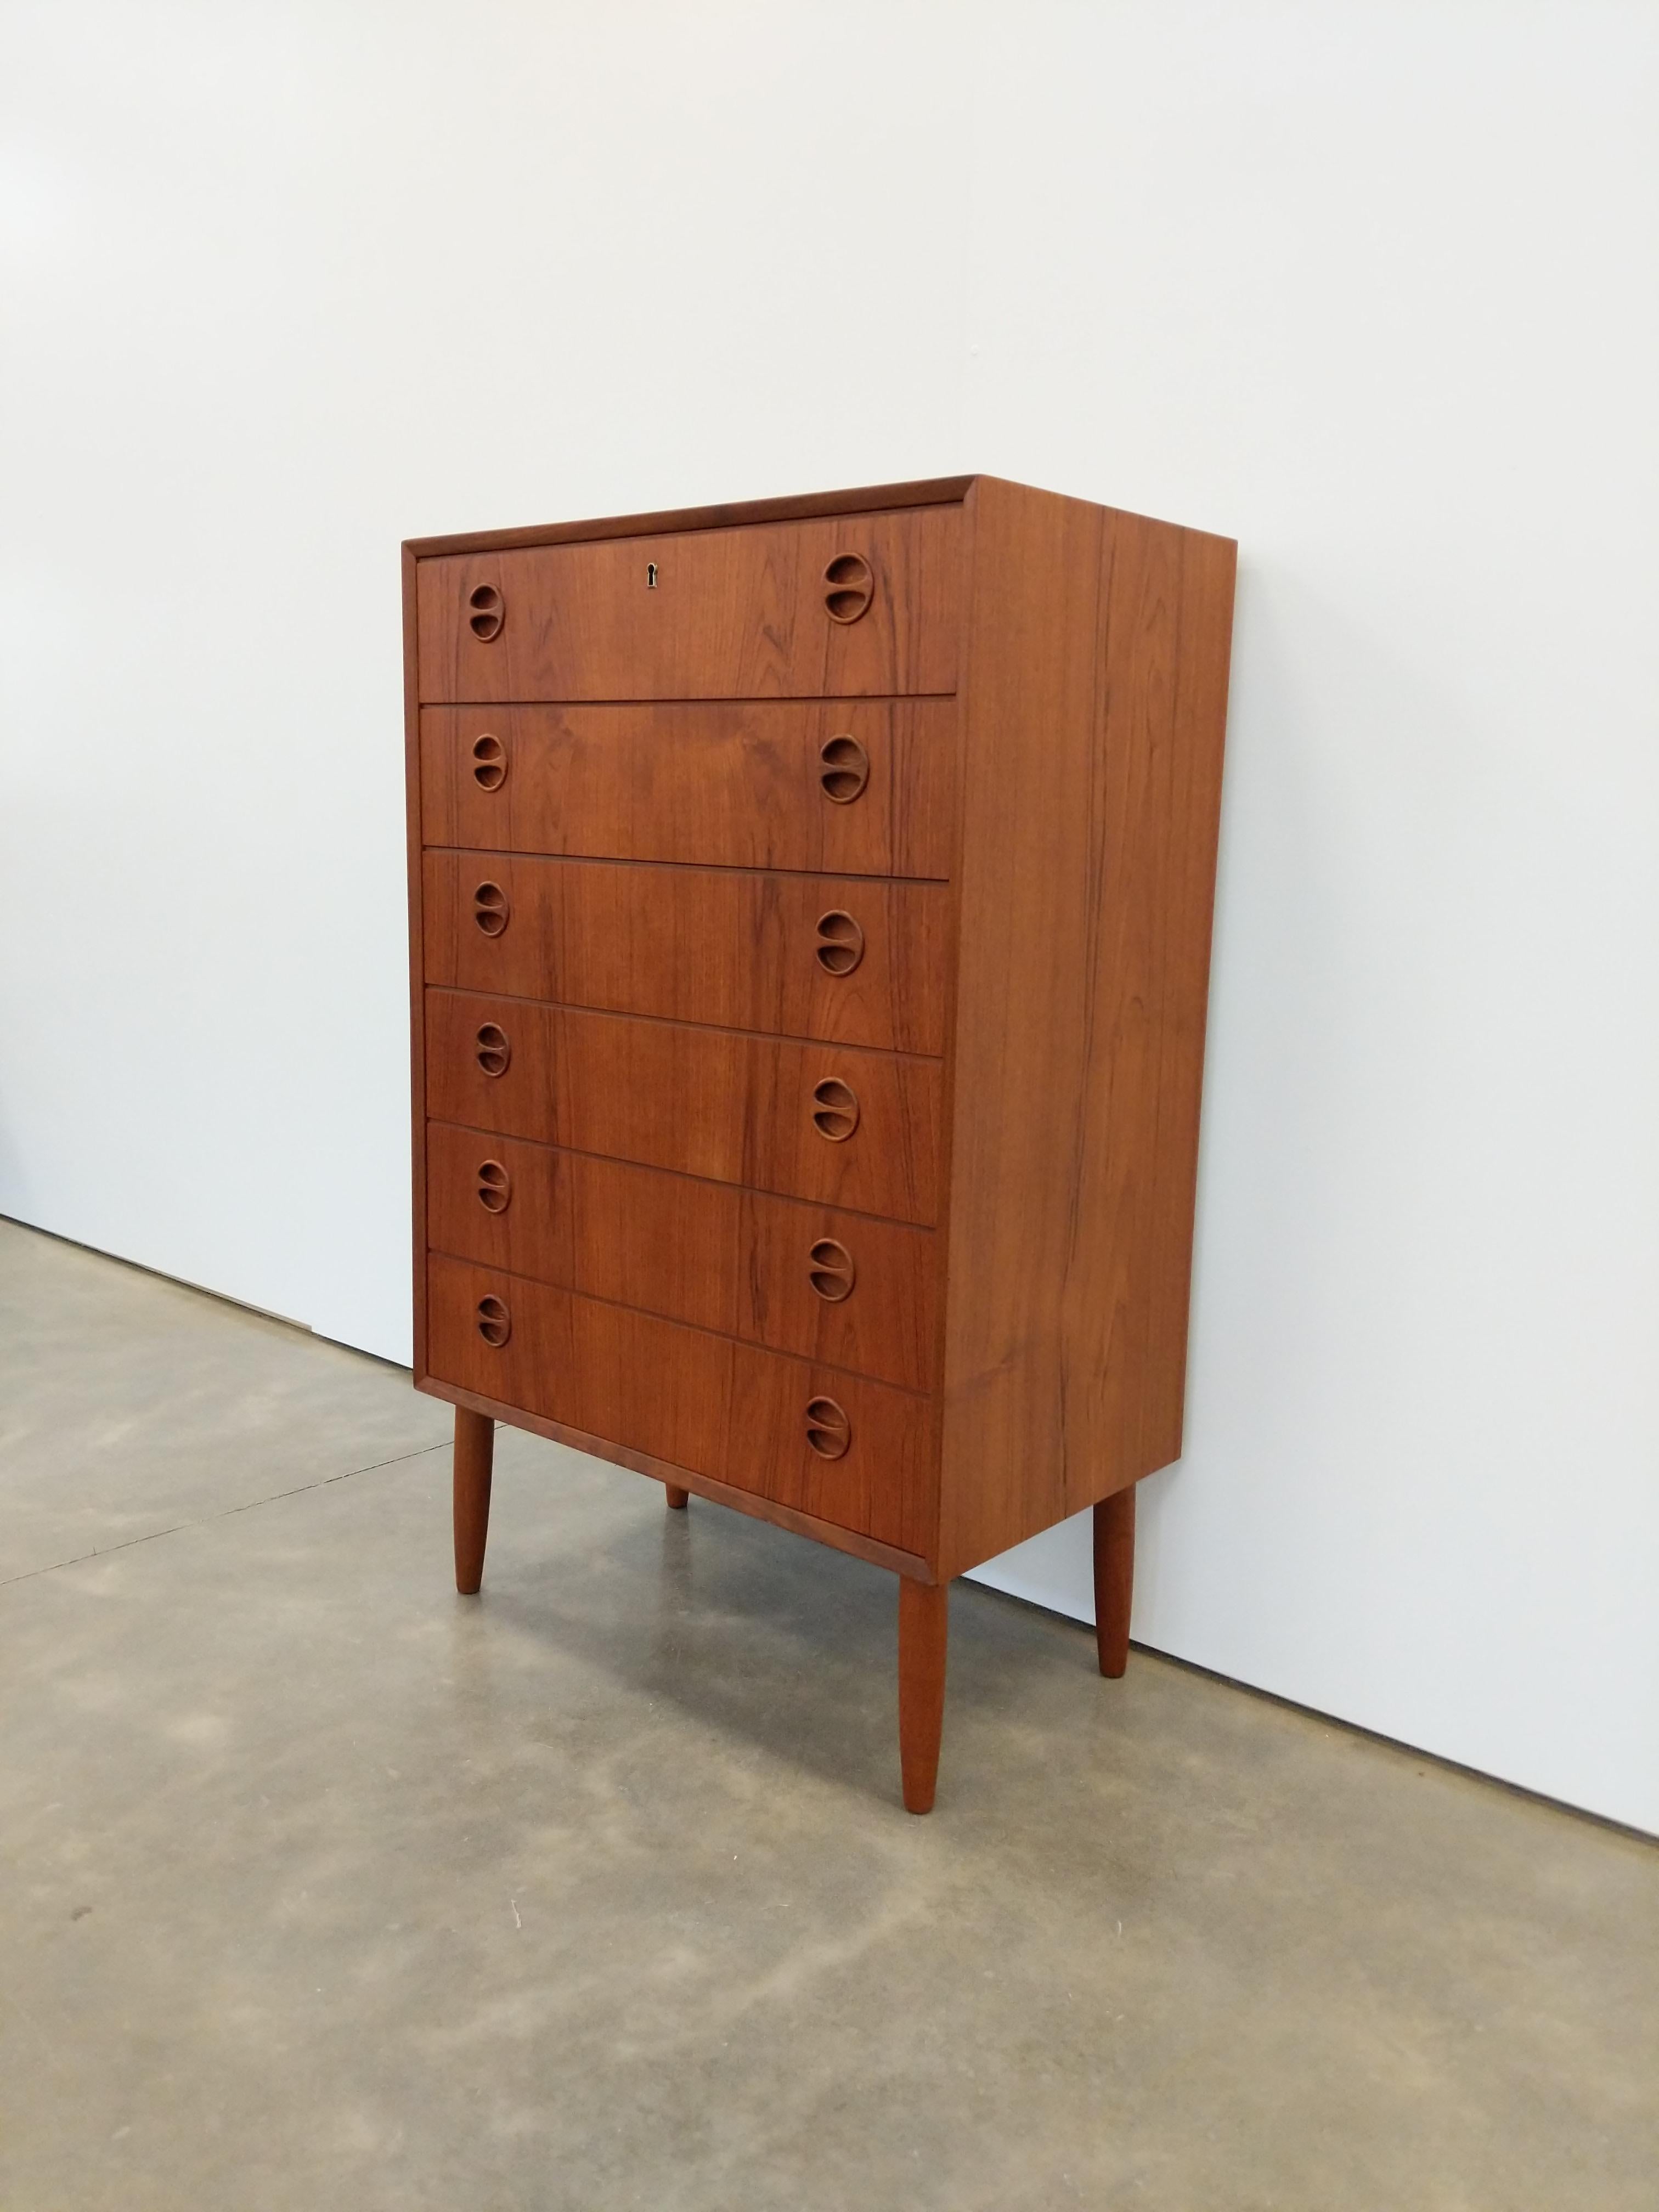 Authentic vintage mid century Danish / Scandinavian Modern teak dresser / chest of drawers.

This piece is in excellent refinished condition with very few signs of age-related wear (see photos).

If you would like any additional details, please